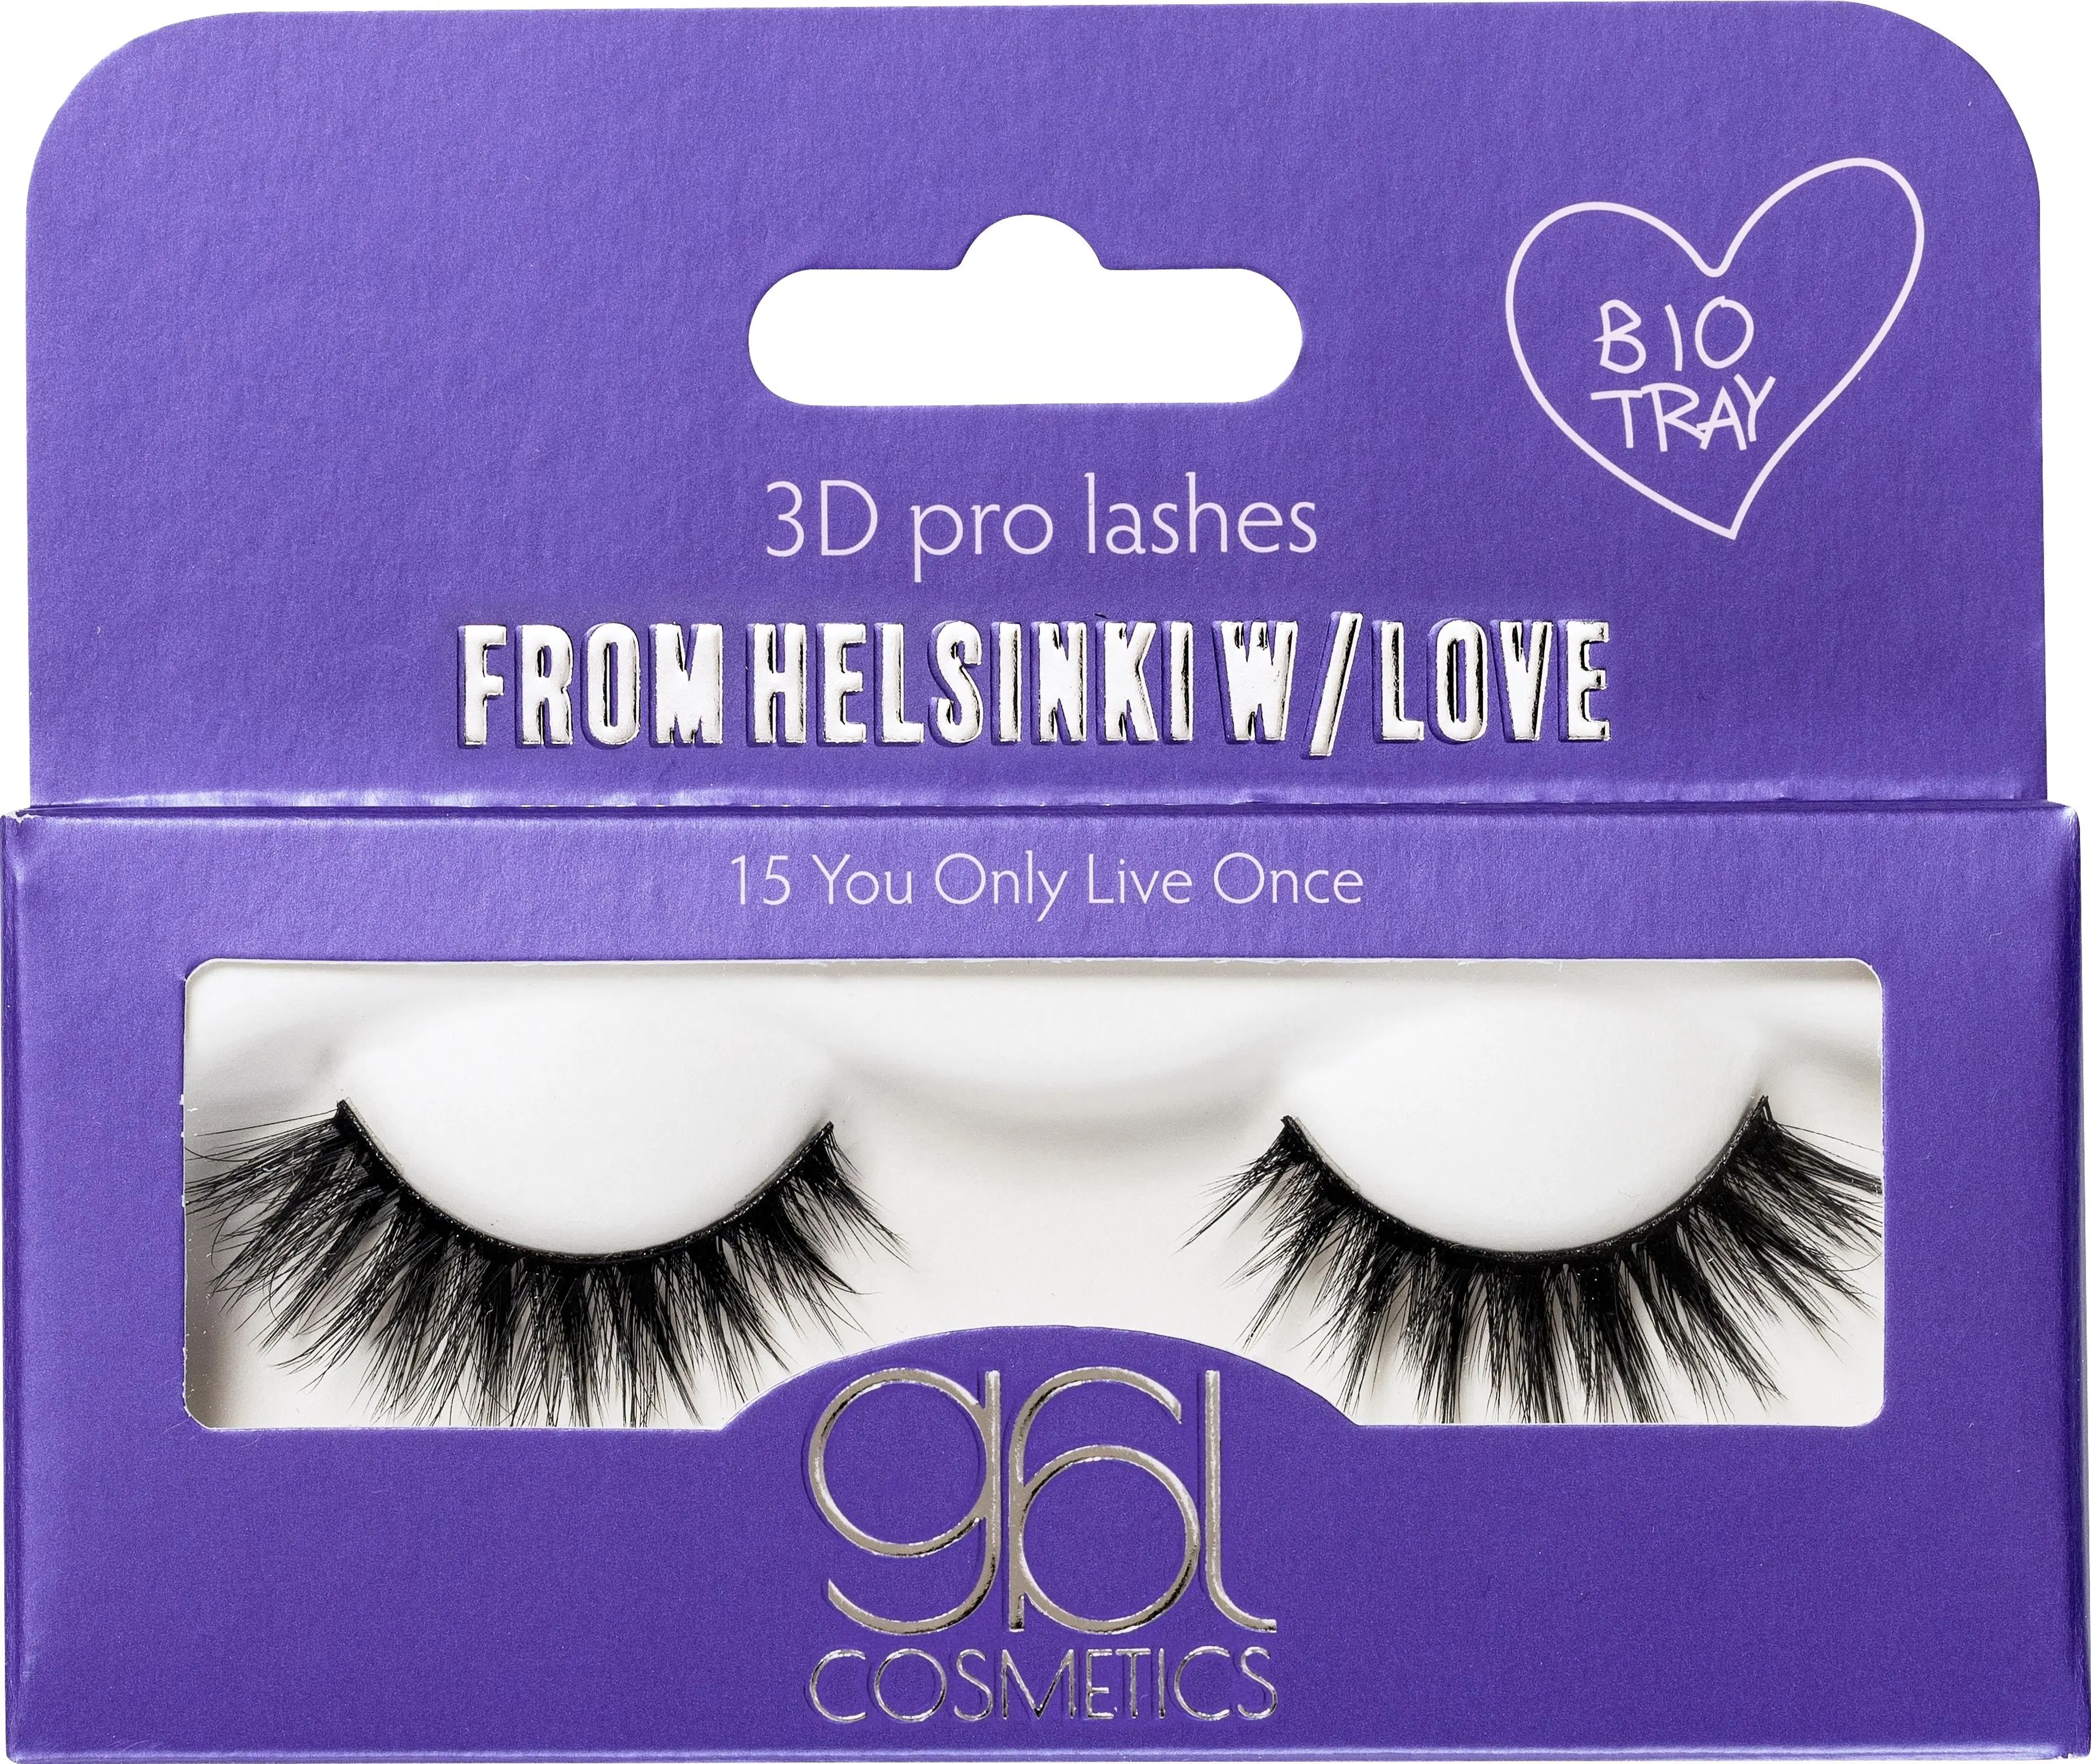 GBL Cosmetics From Helsinki W/Love Collection 15 You Only Live Once irtoripset